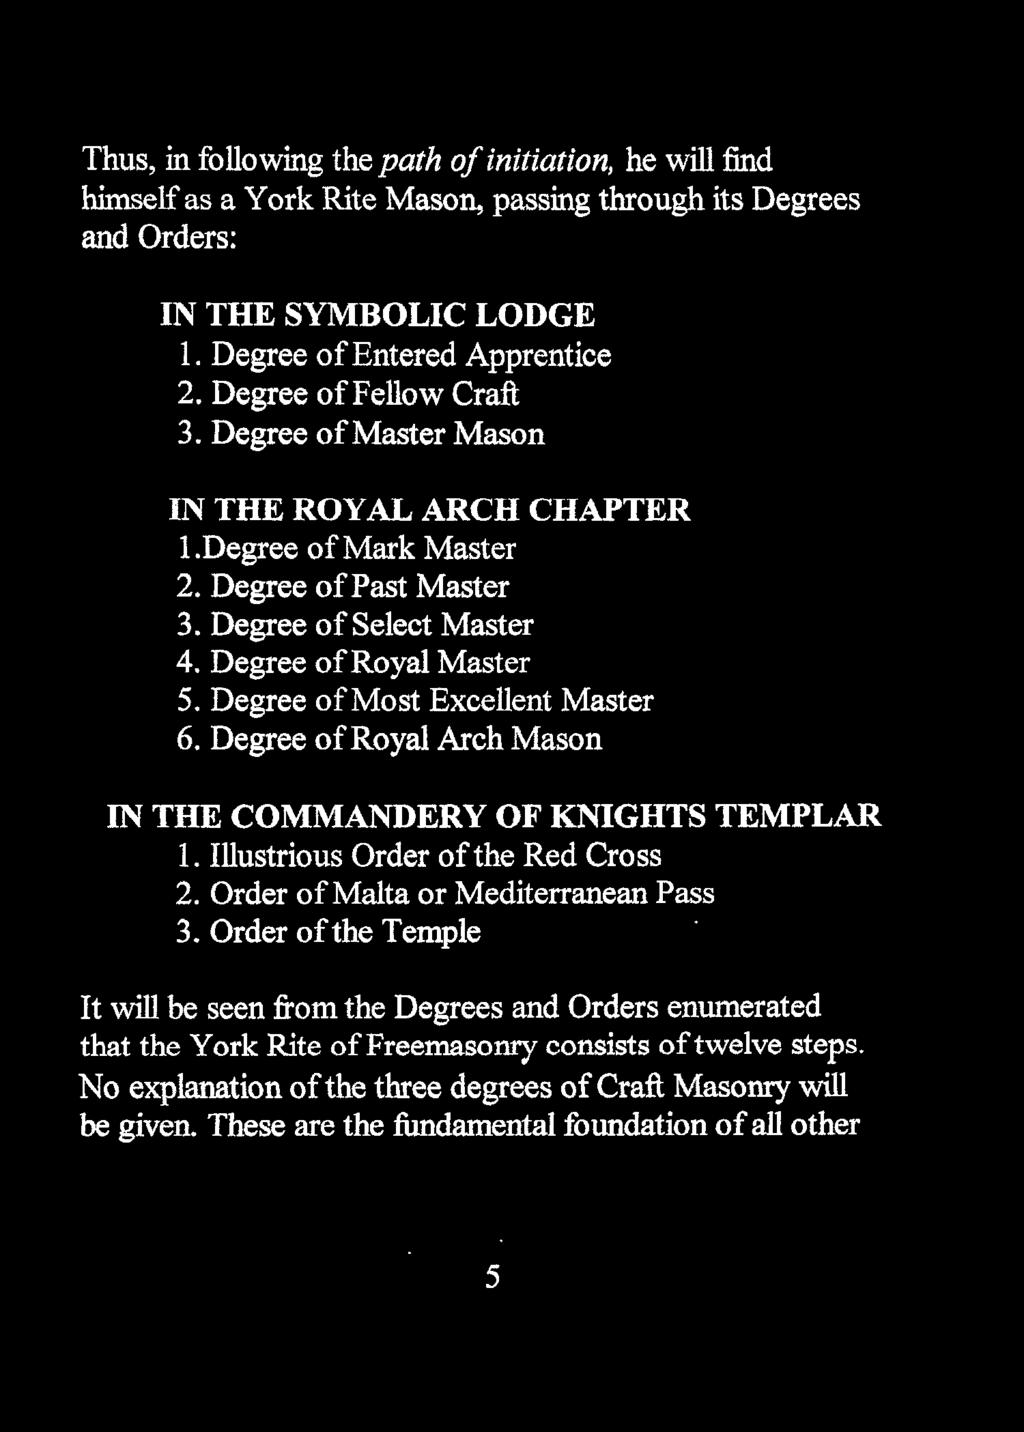 Degree ofmost Excellent Master 6. Degree of Royal Arch Mason IN THE COMMANDERY OF KNIGHTS TEMPLAR 1. Illustrious Order ofthe Red Cross 2. Order of Malta or Mediterranean Pass 3.